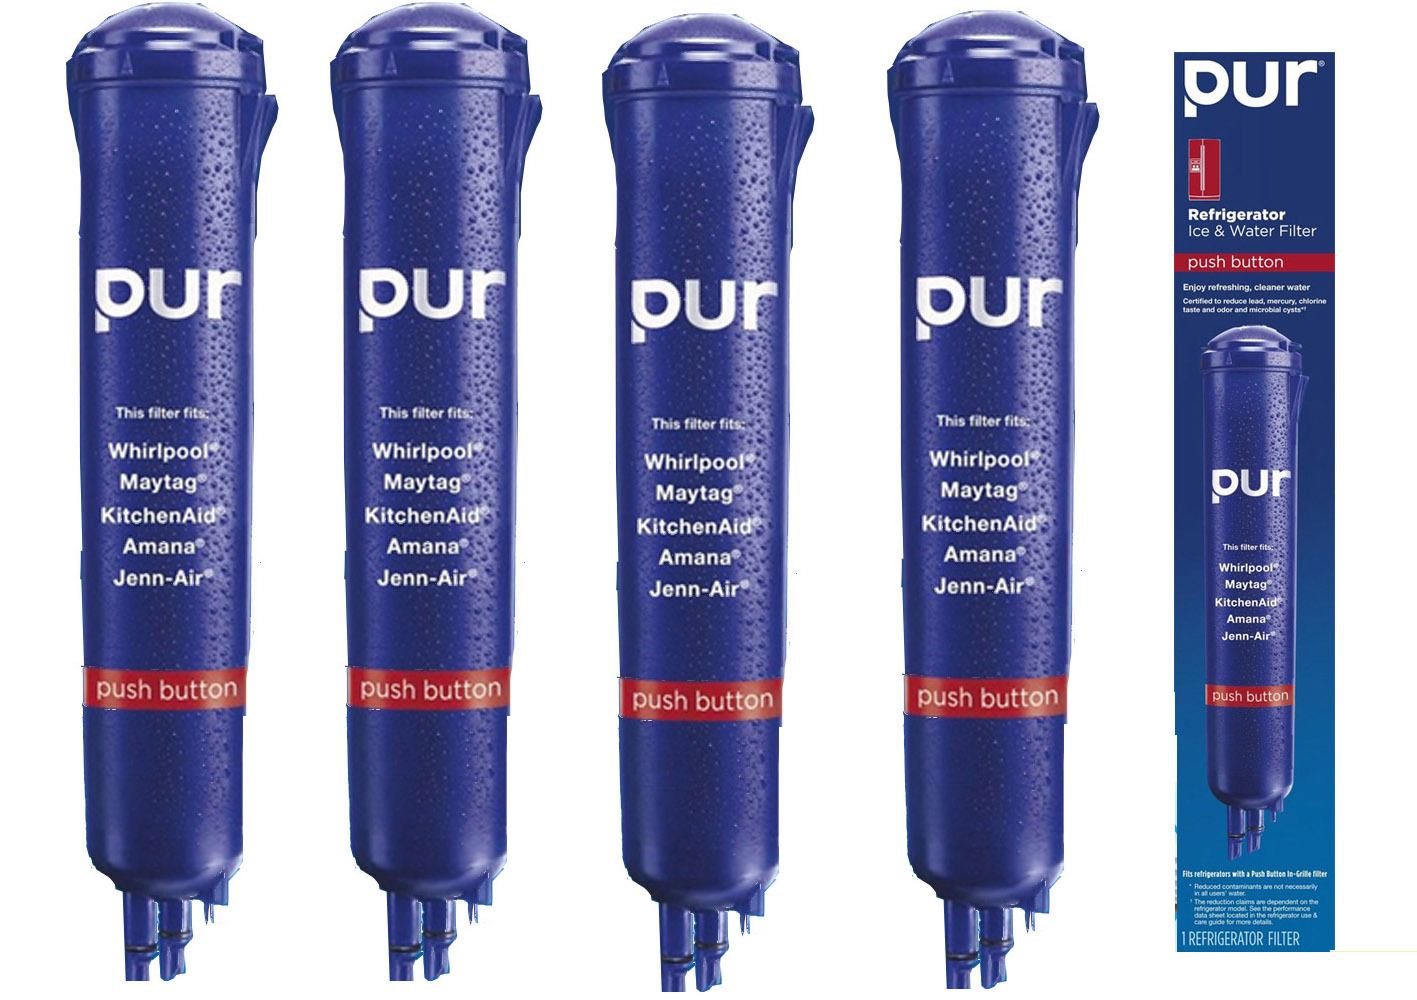 7 Amazing Pur Whirlpool Refrigerator Water Filter for 2023